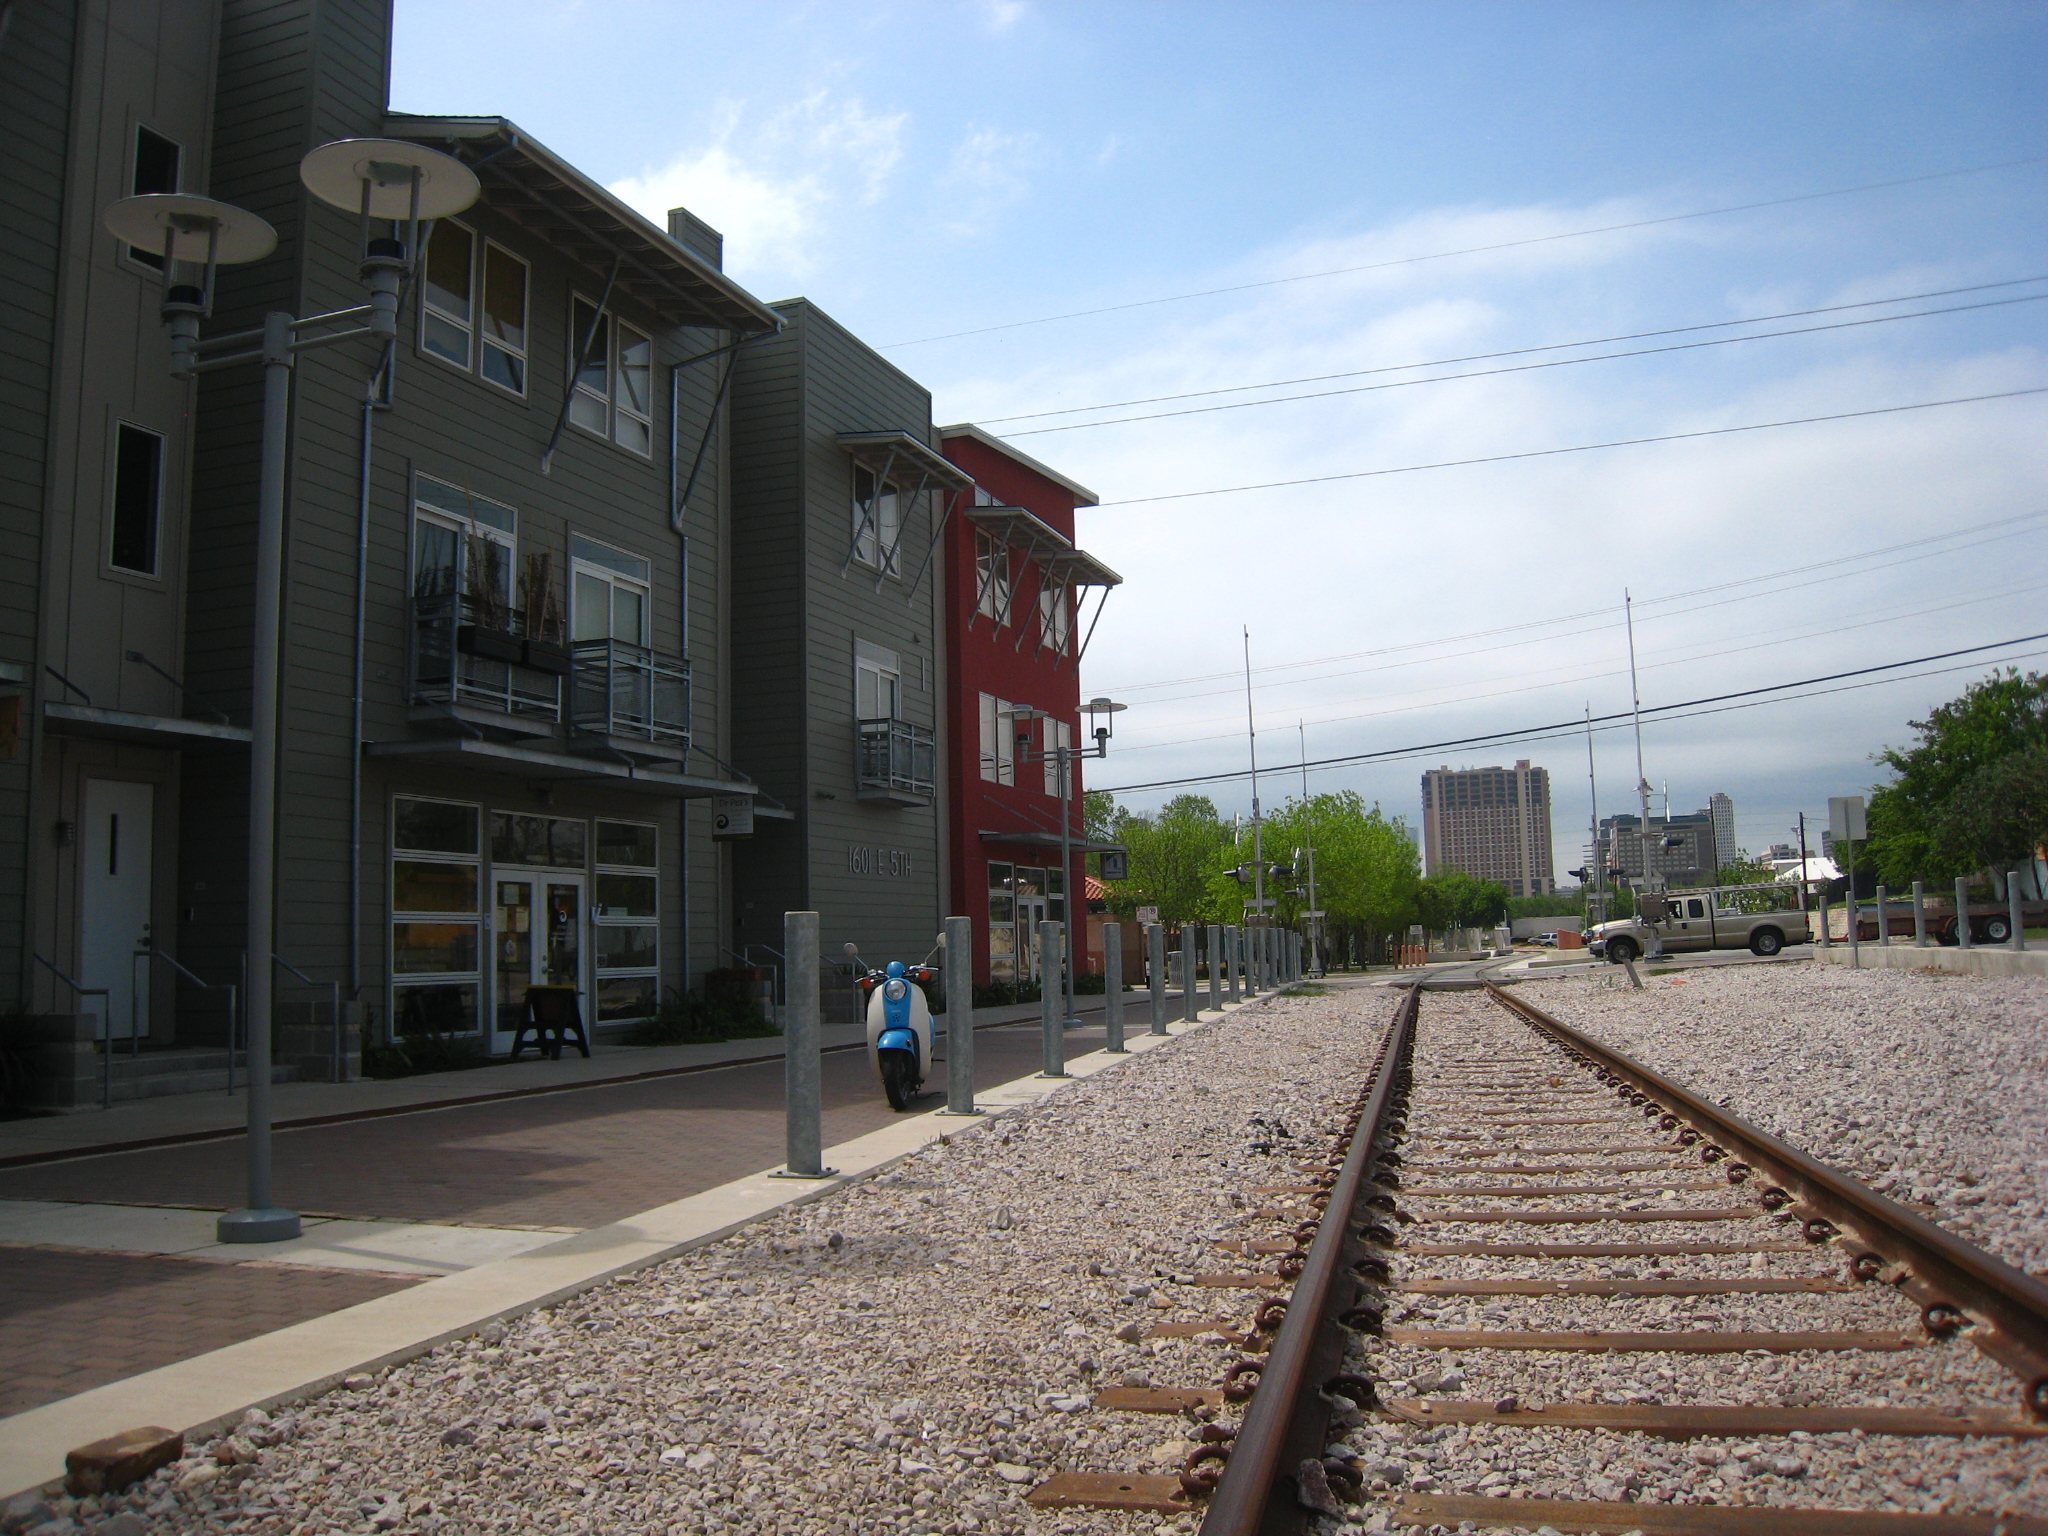 The Saltillo Lofts in swiftly gentrifying East Austin. According to Eric Tang, a researcher at the University of Texas at Austin, the area's white population increased by 442 percent between 2000 and 2010, while communities of color saw their numbers drop.